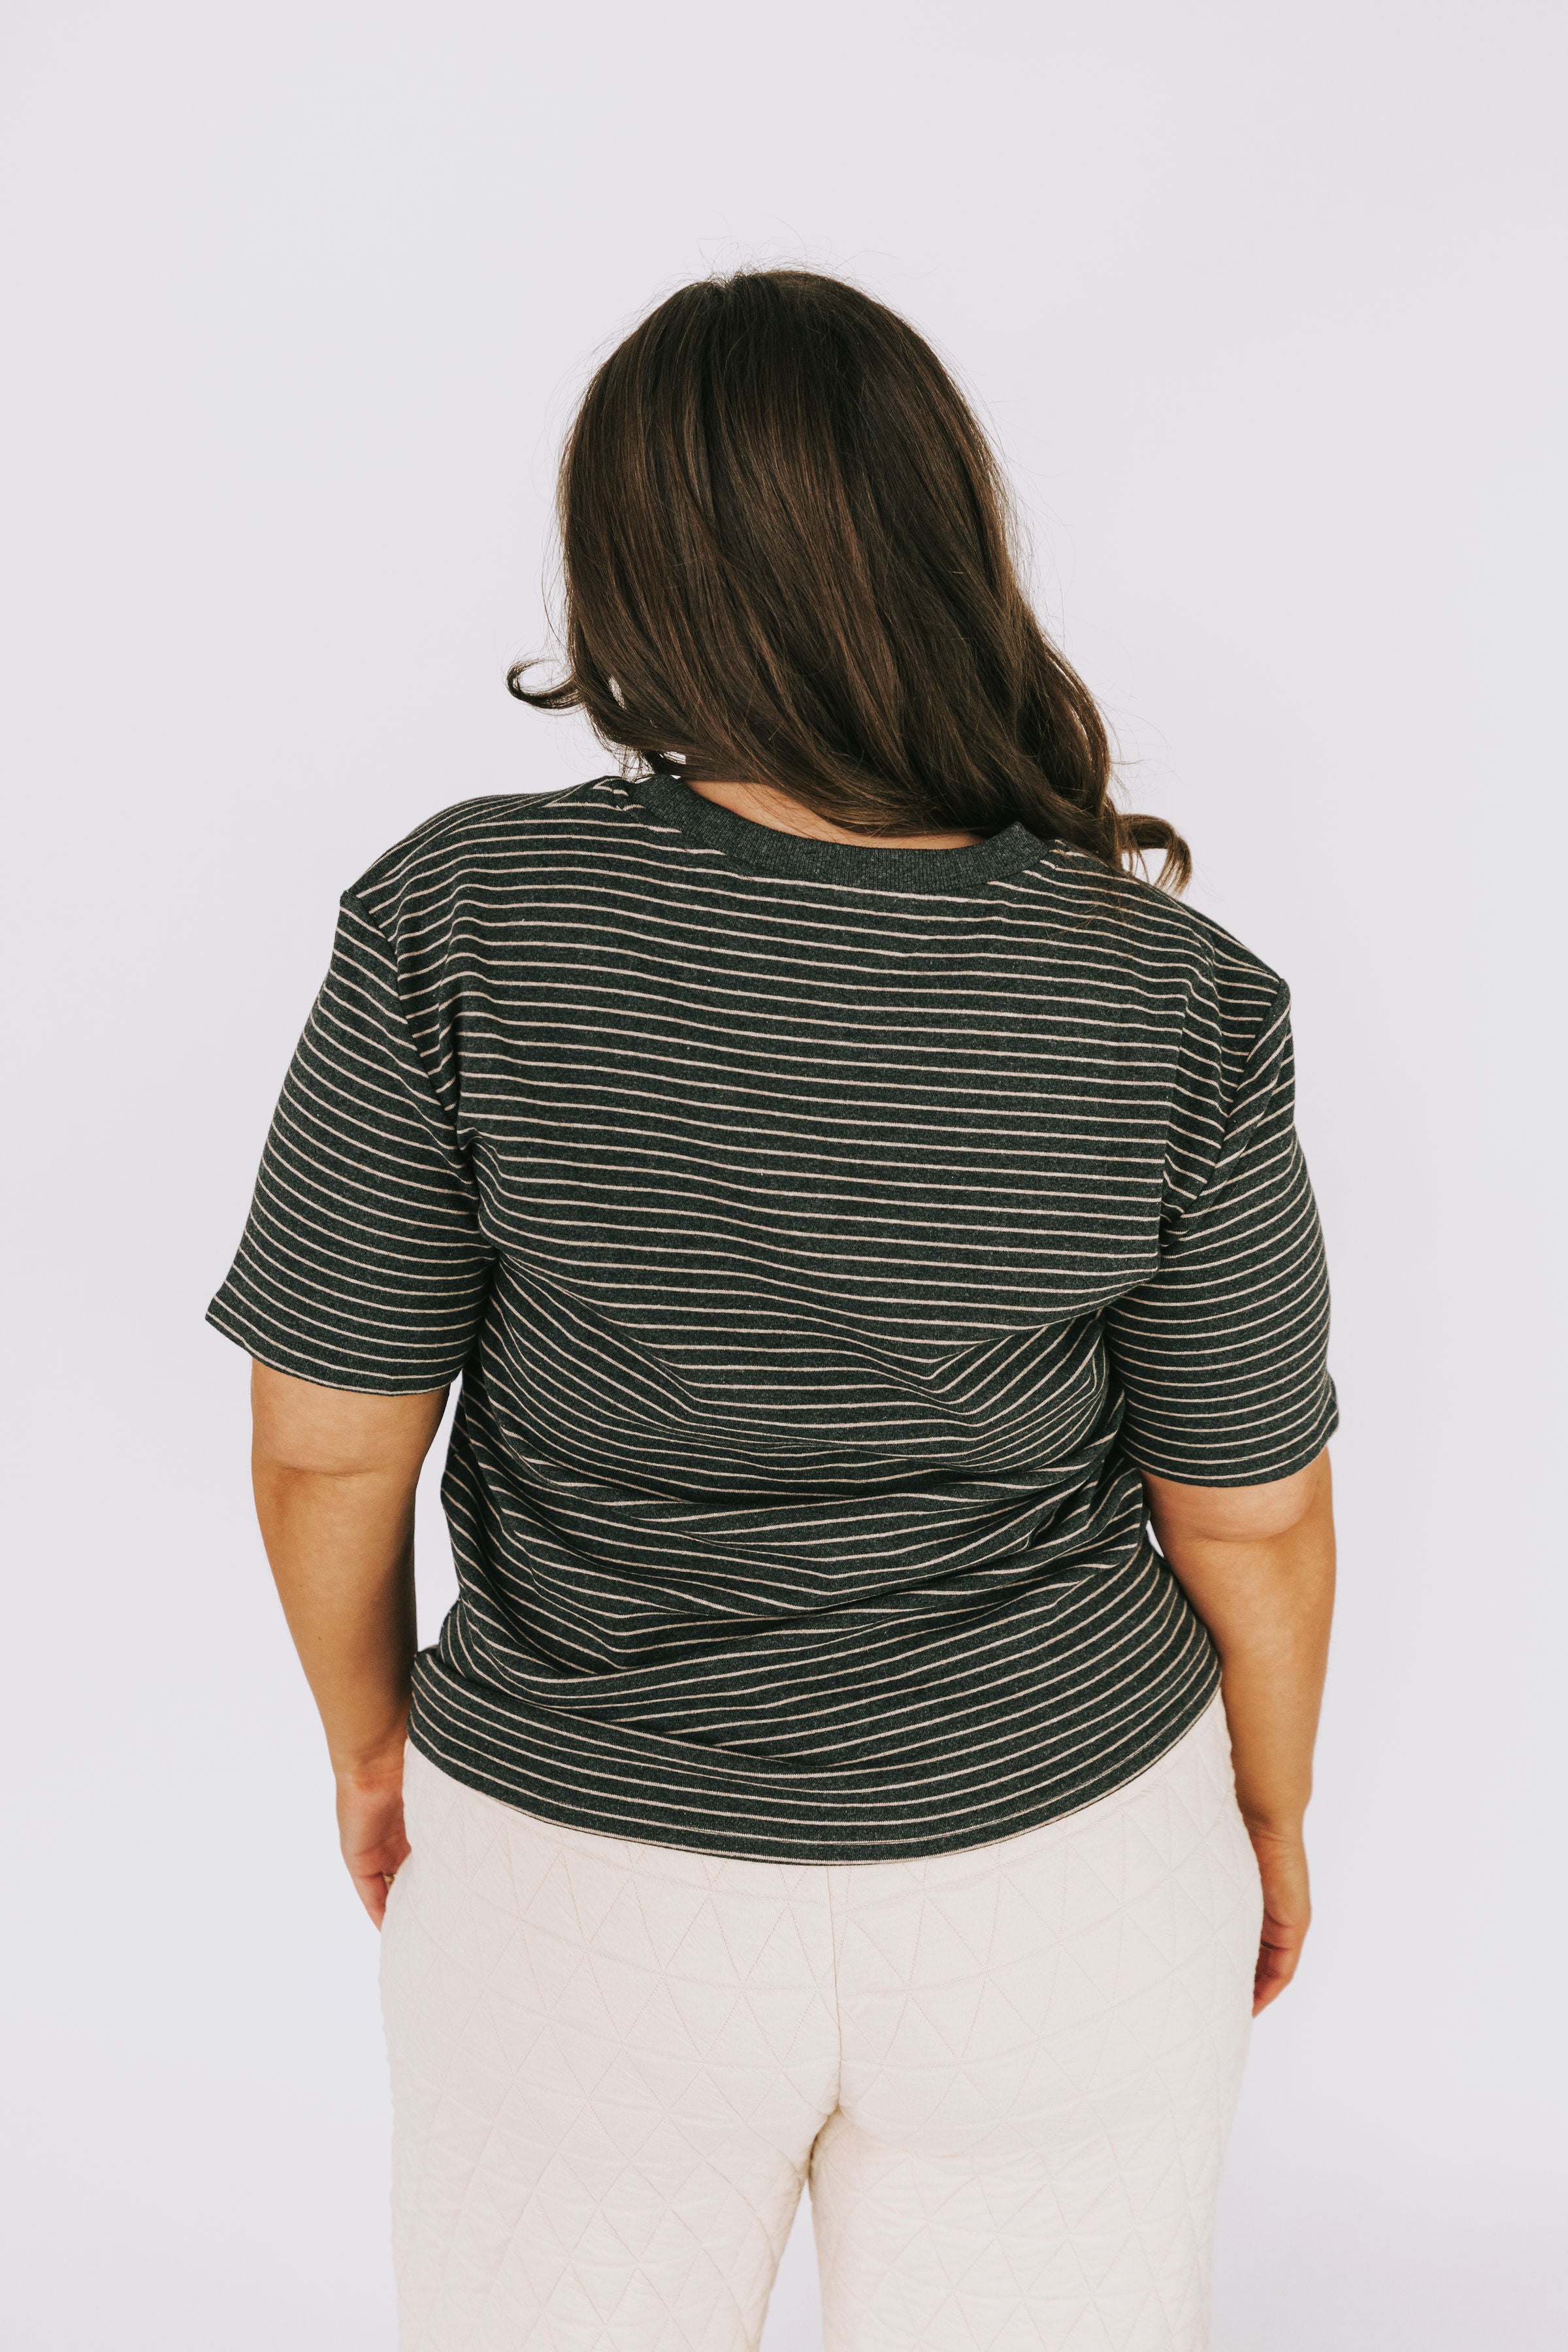 PLUS SIZE - Each Day Top